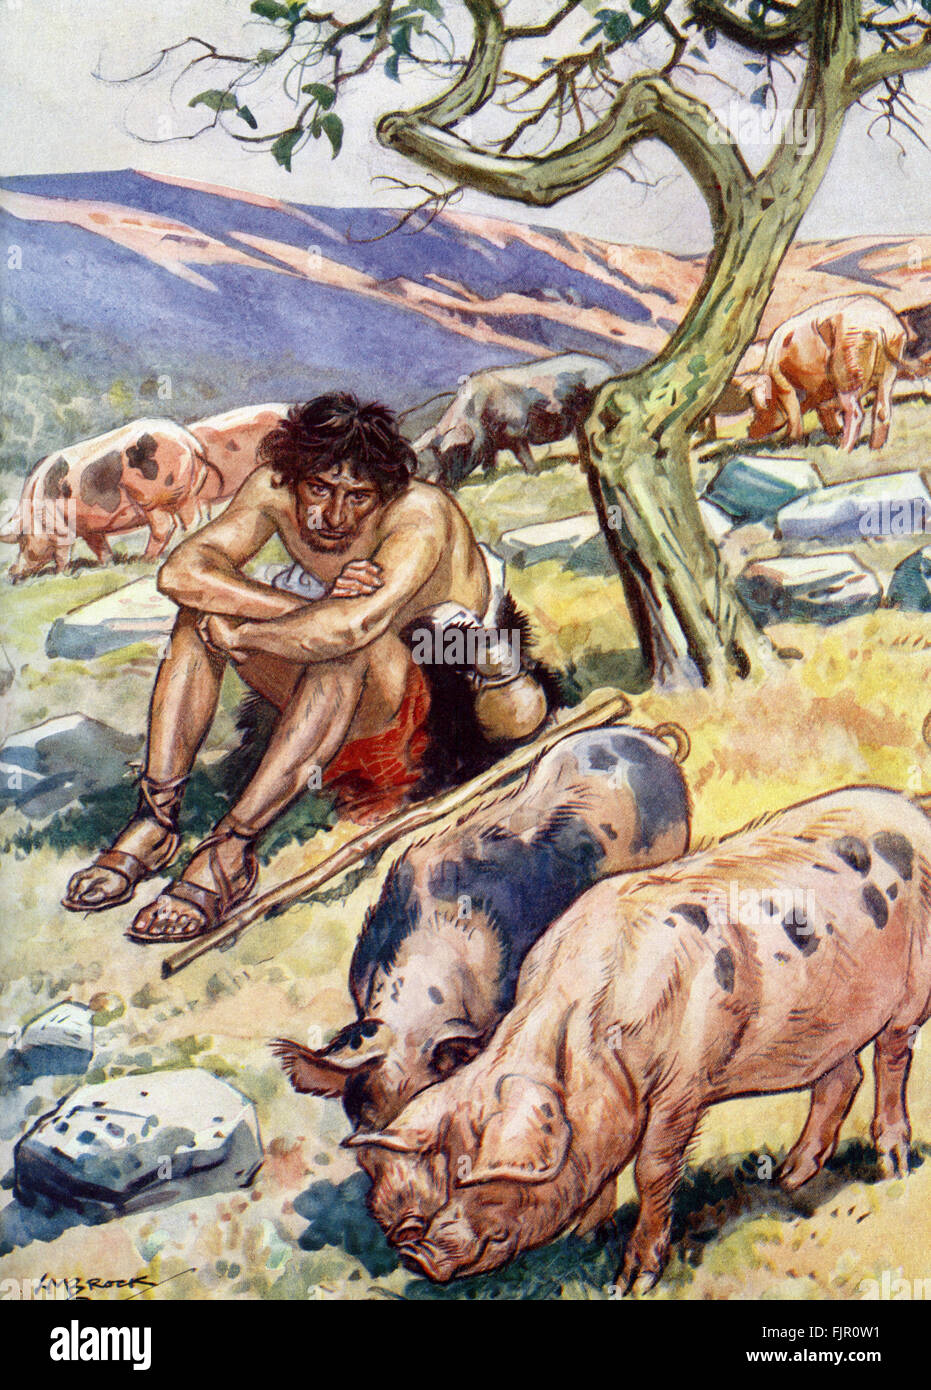 Jesus' parable of the prodigal son. 'And he would fain have filled his belly with the husks that the swine did eat: and no man gave unto him.' Luke 15:16   Illustration by H M Brock  11 July 1875 – 21 July 1960 Stock Photo